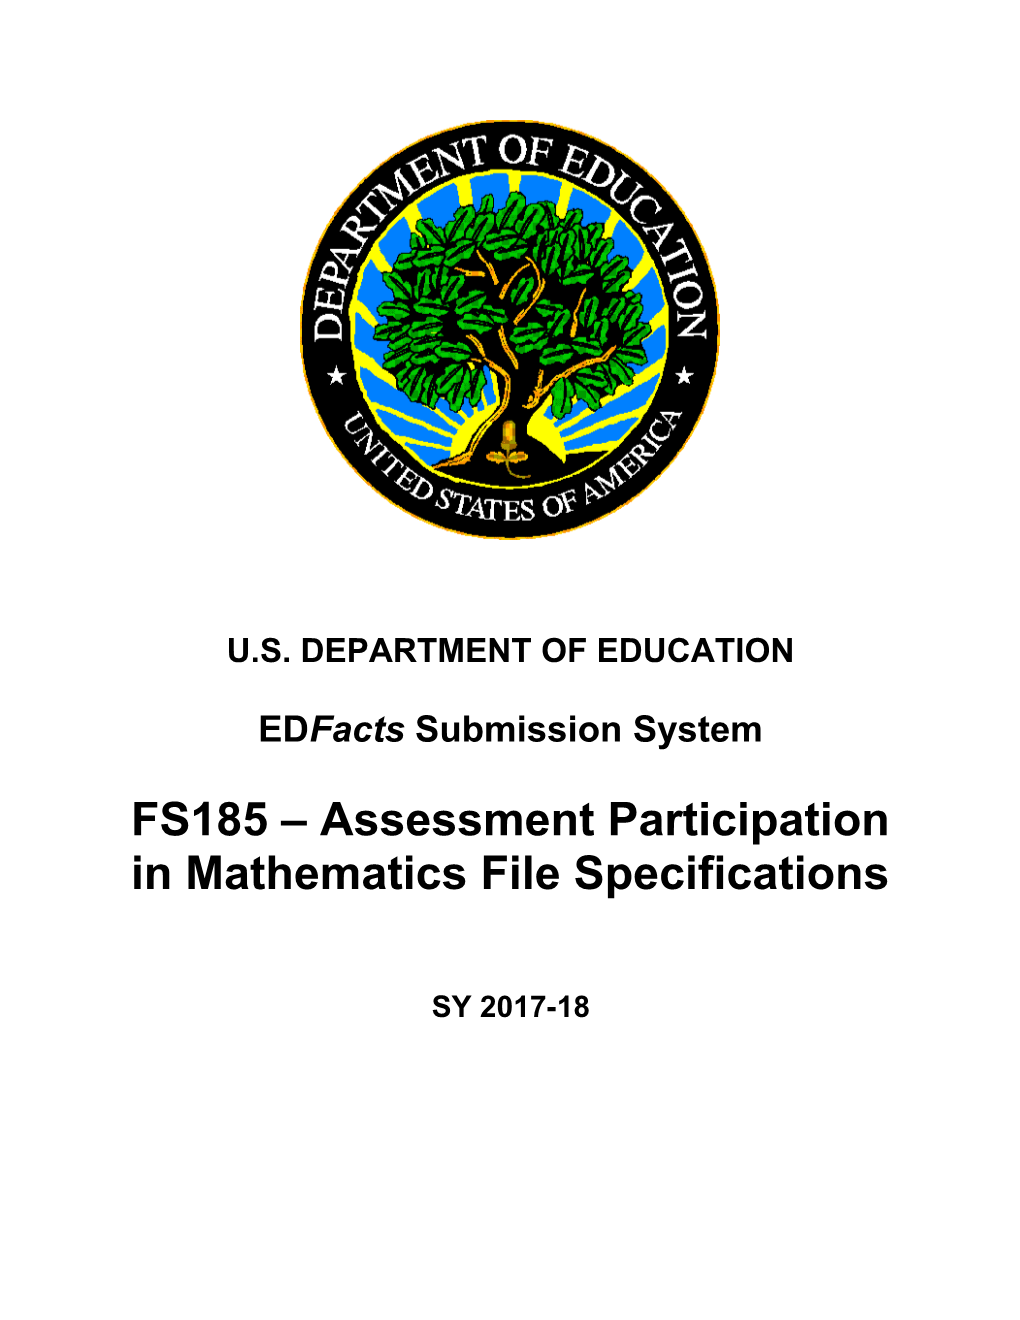 FS185 Assessment Participation in Mathematics File Specifications (Msword)